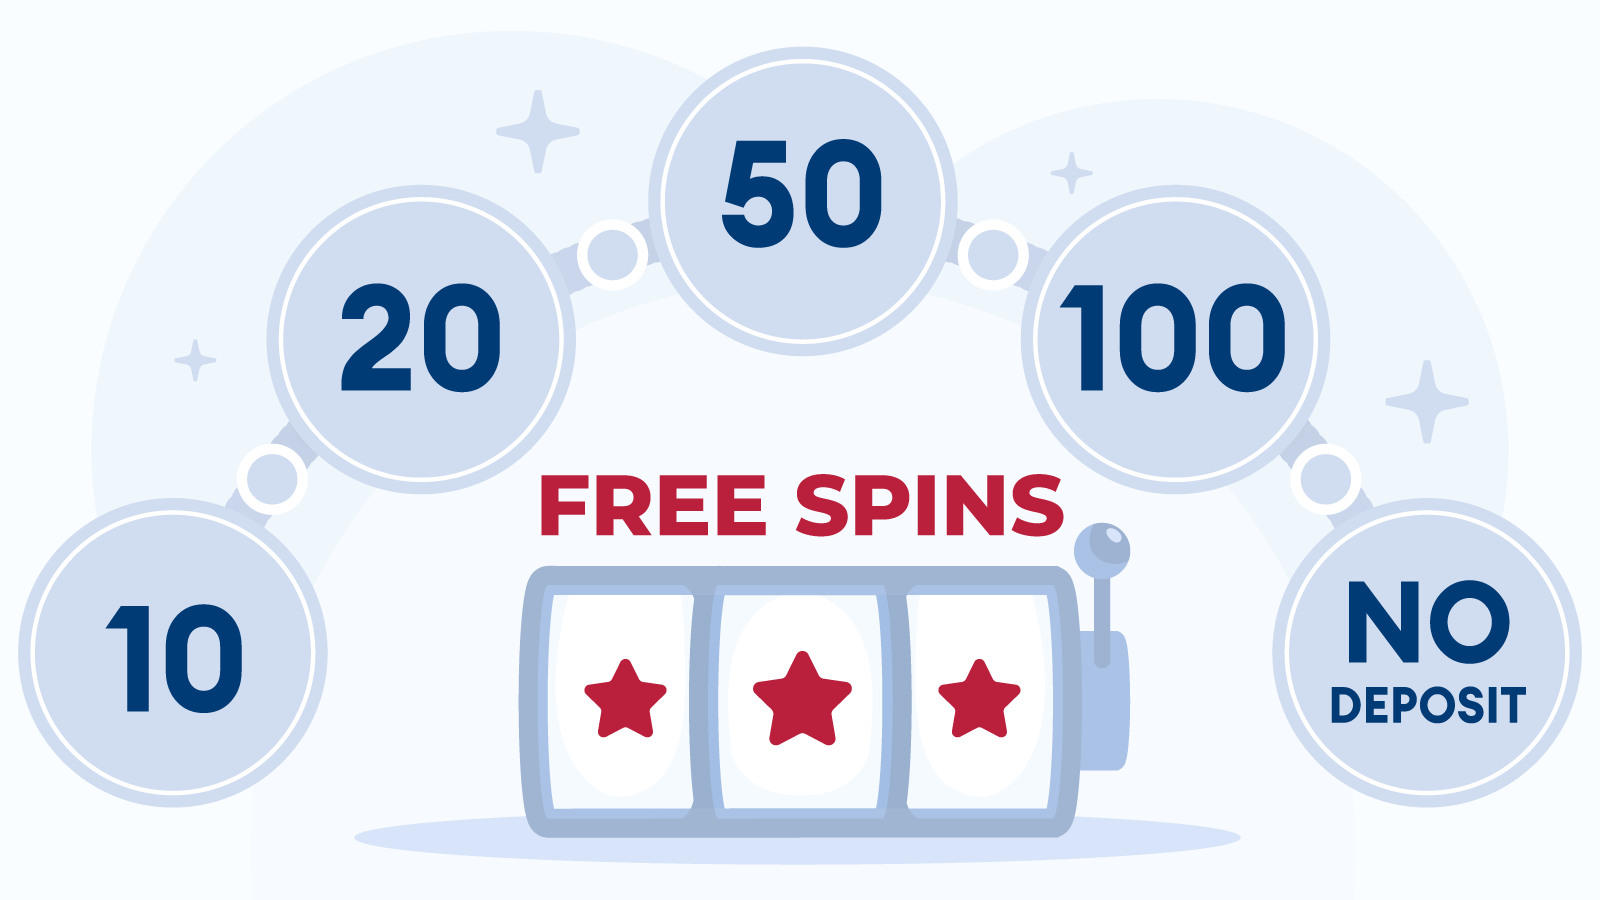 Alternatives to 30 Free Spins Bonuses for New Players